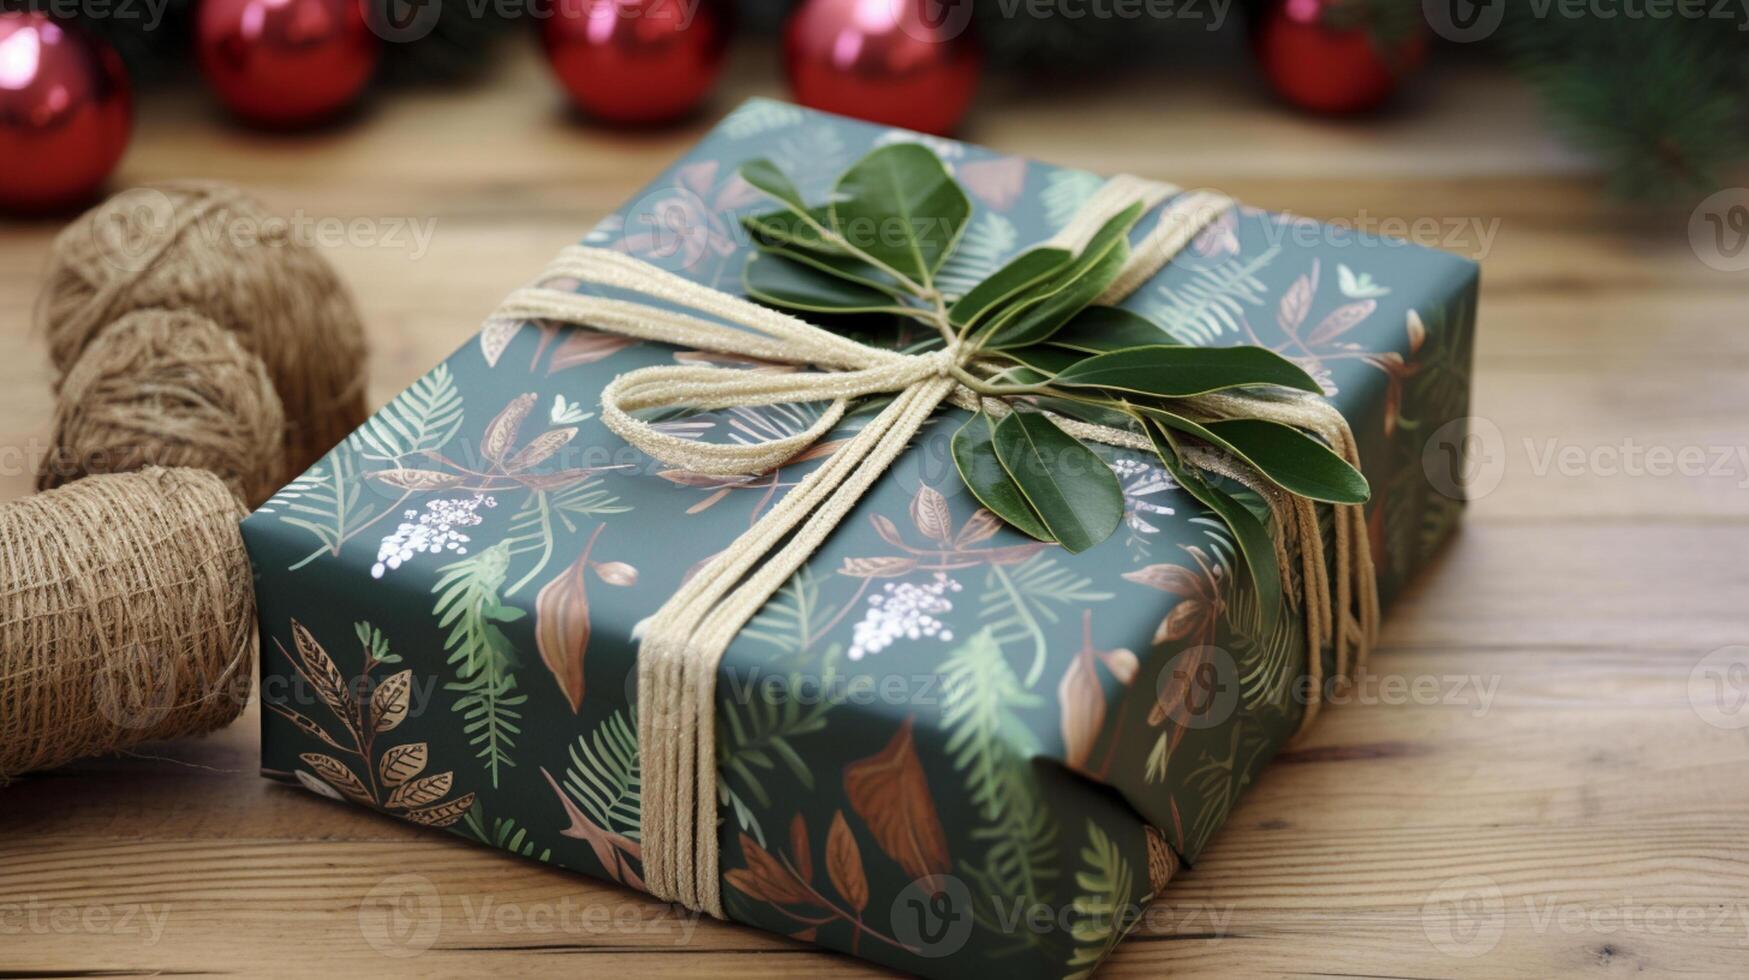 Christmas gift wrapping idea for boxing day and winter holidays in the English countryside tradition photo